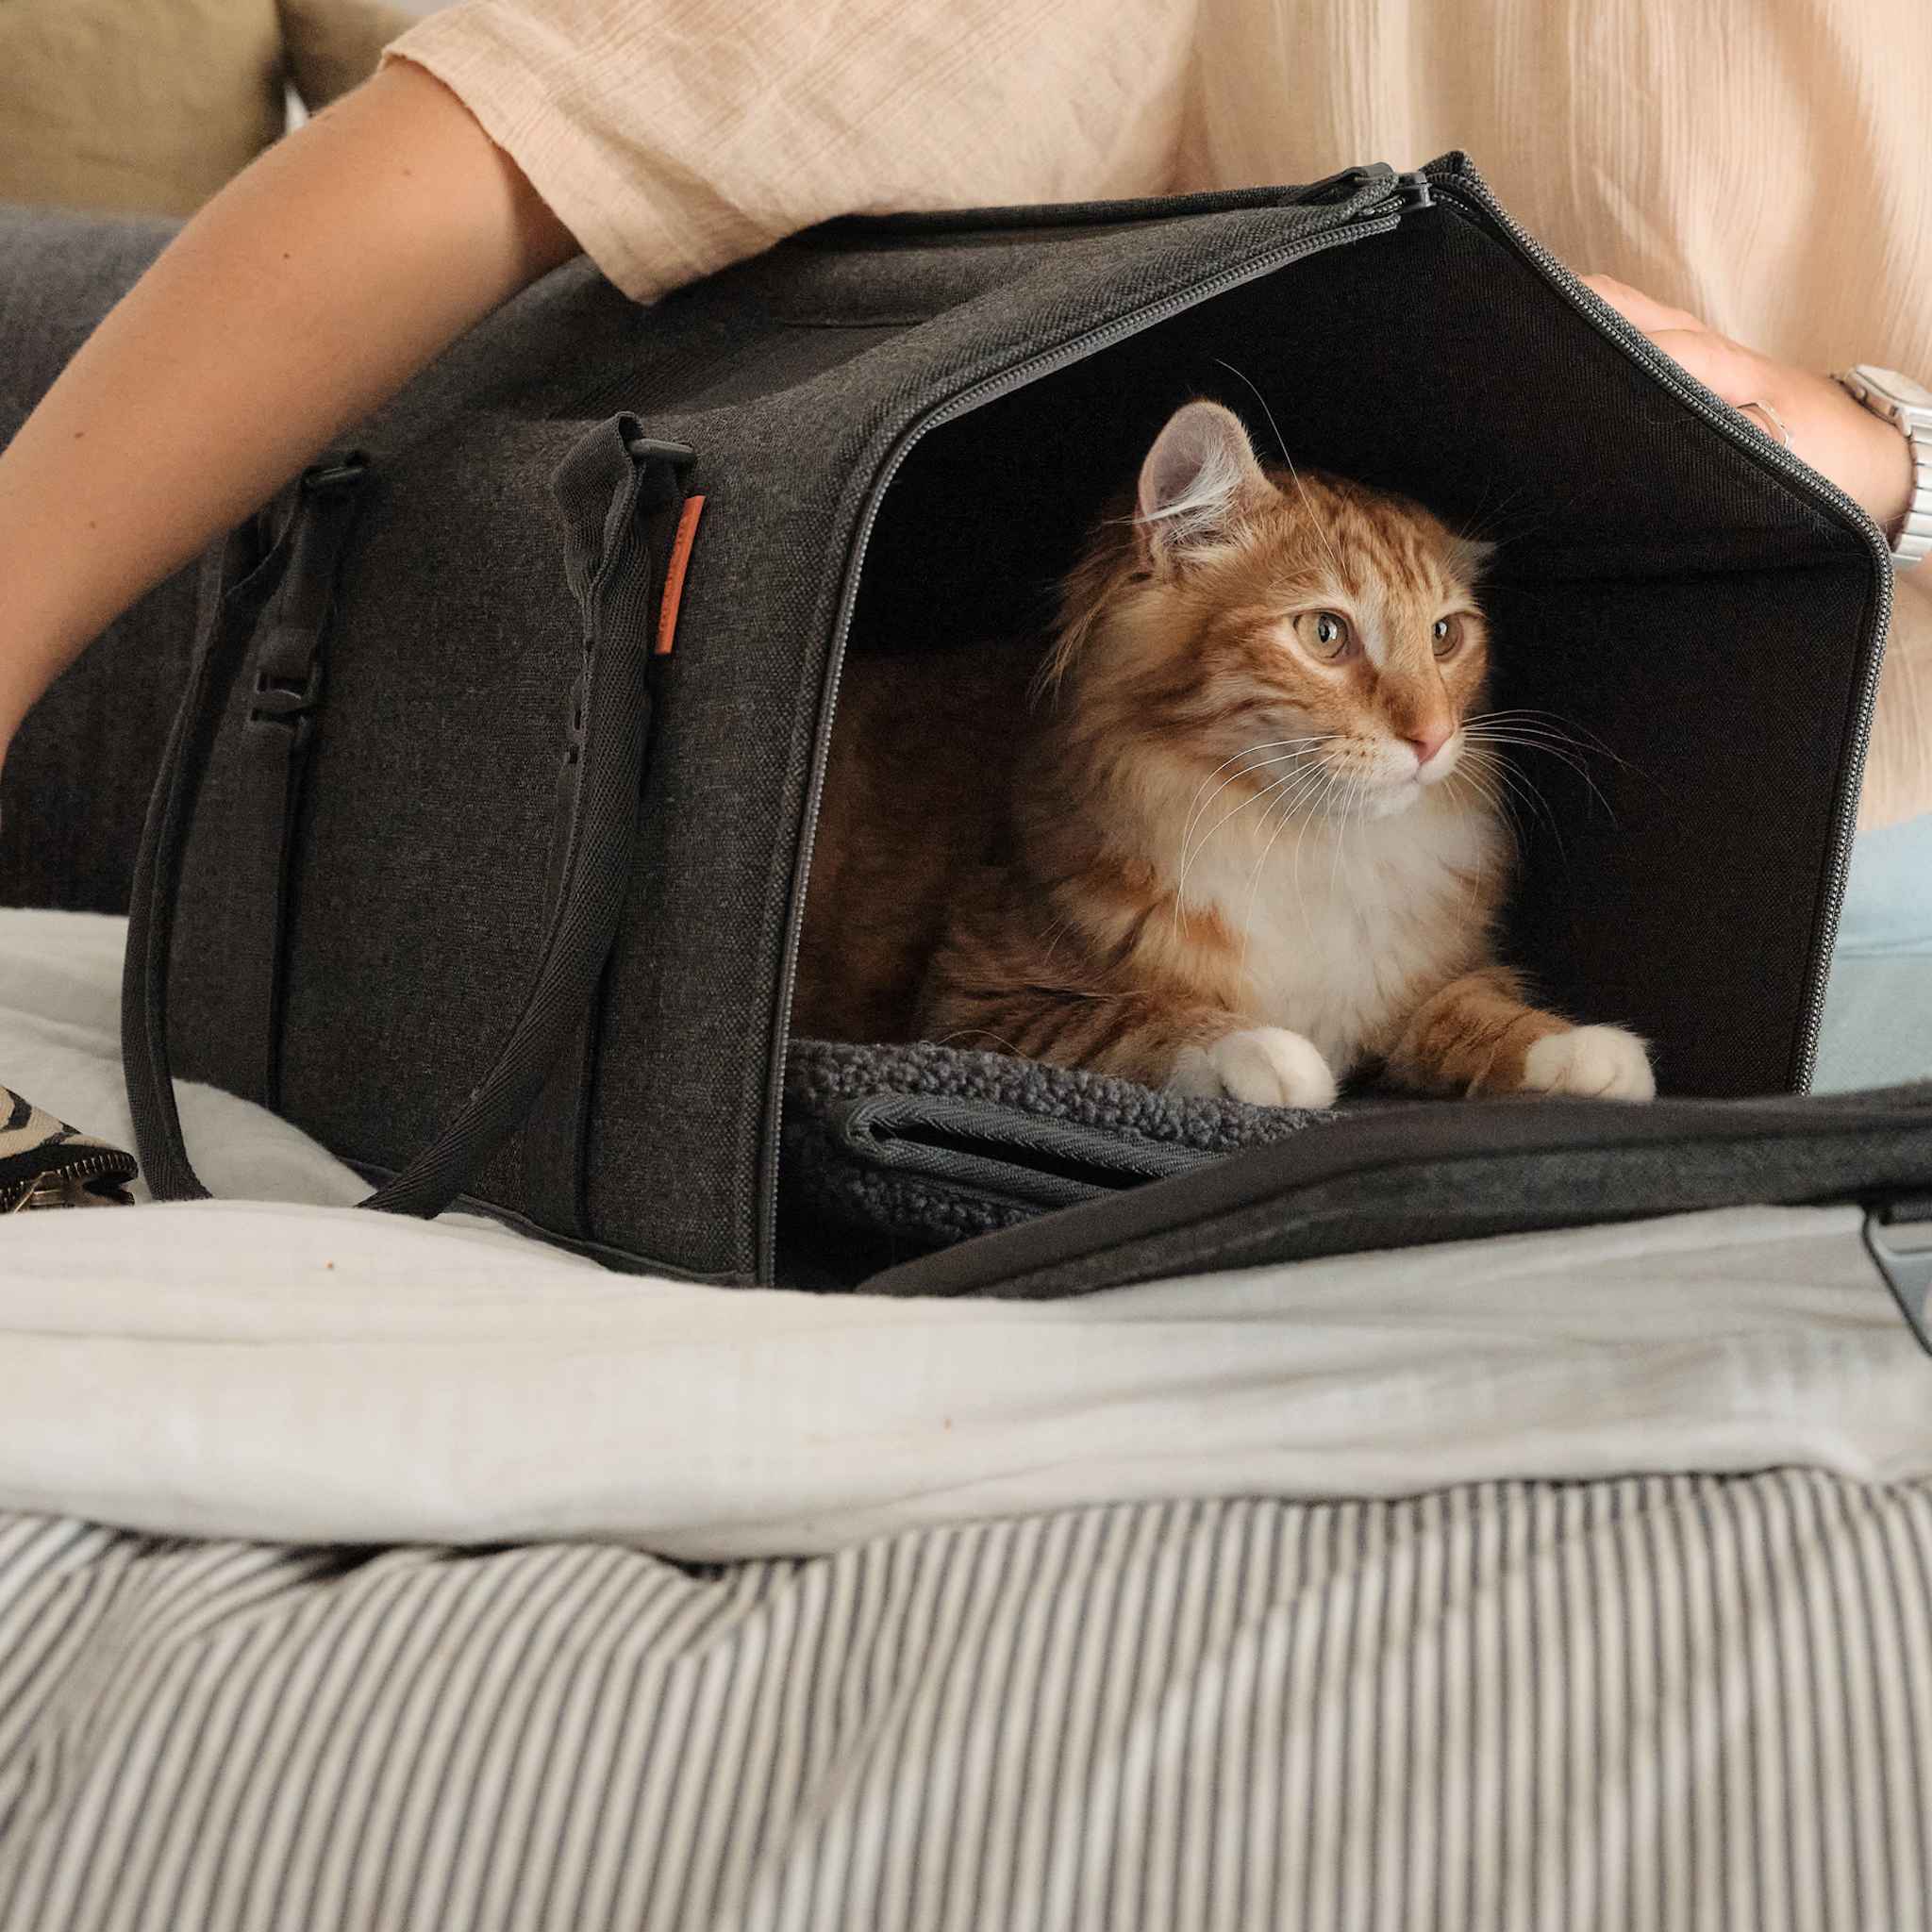 Tuft + Paw launched a new Porto Cat Carrier